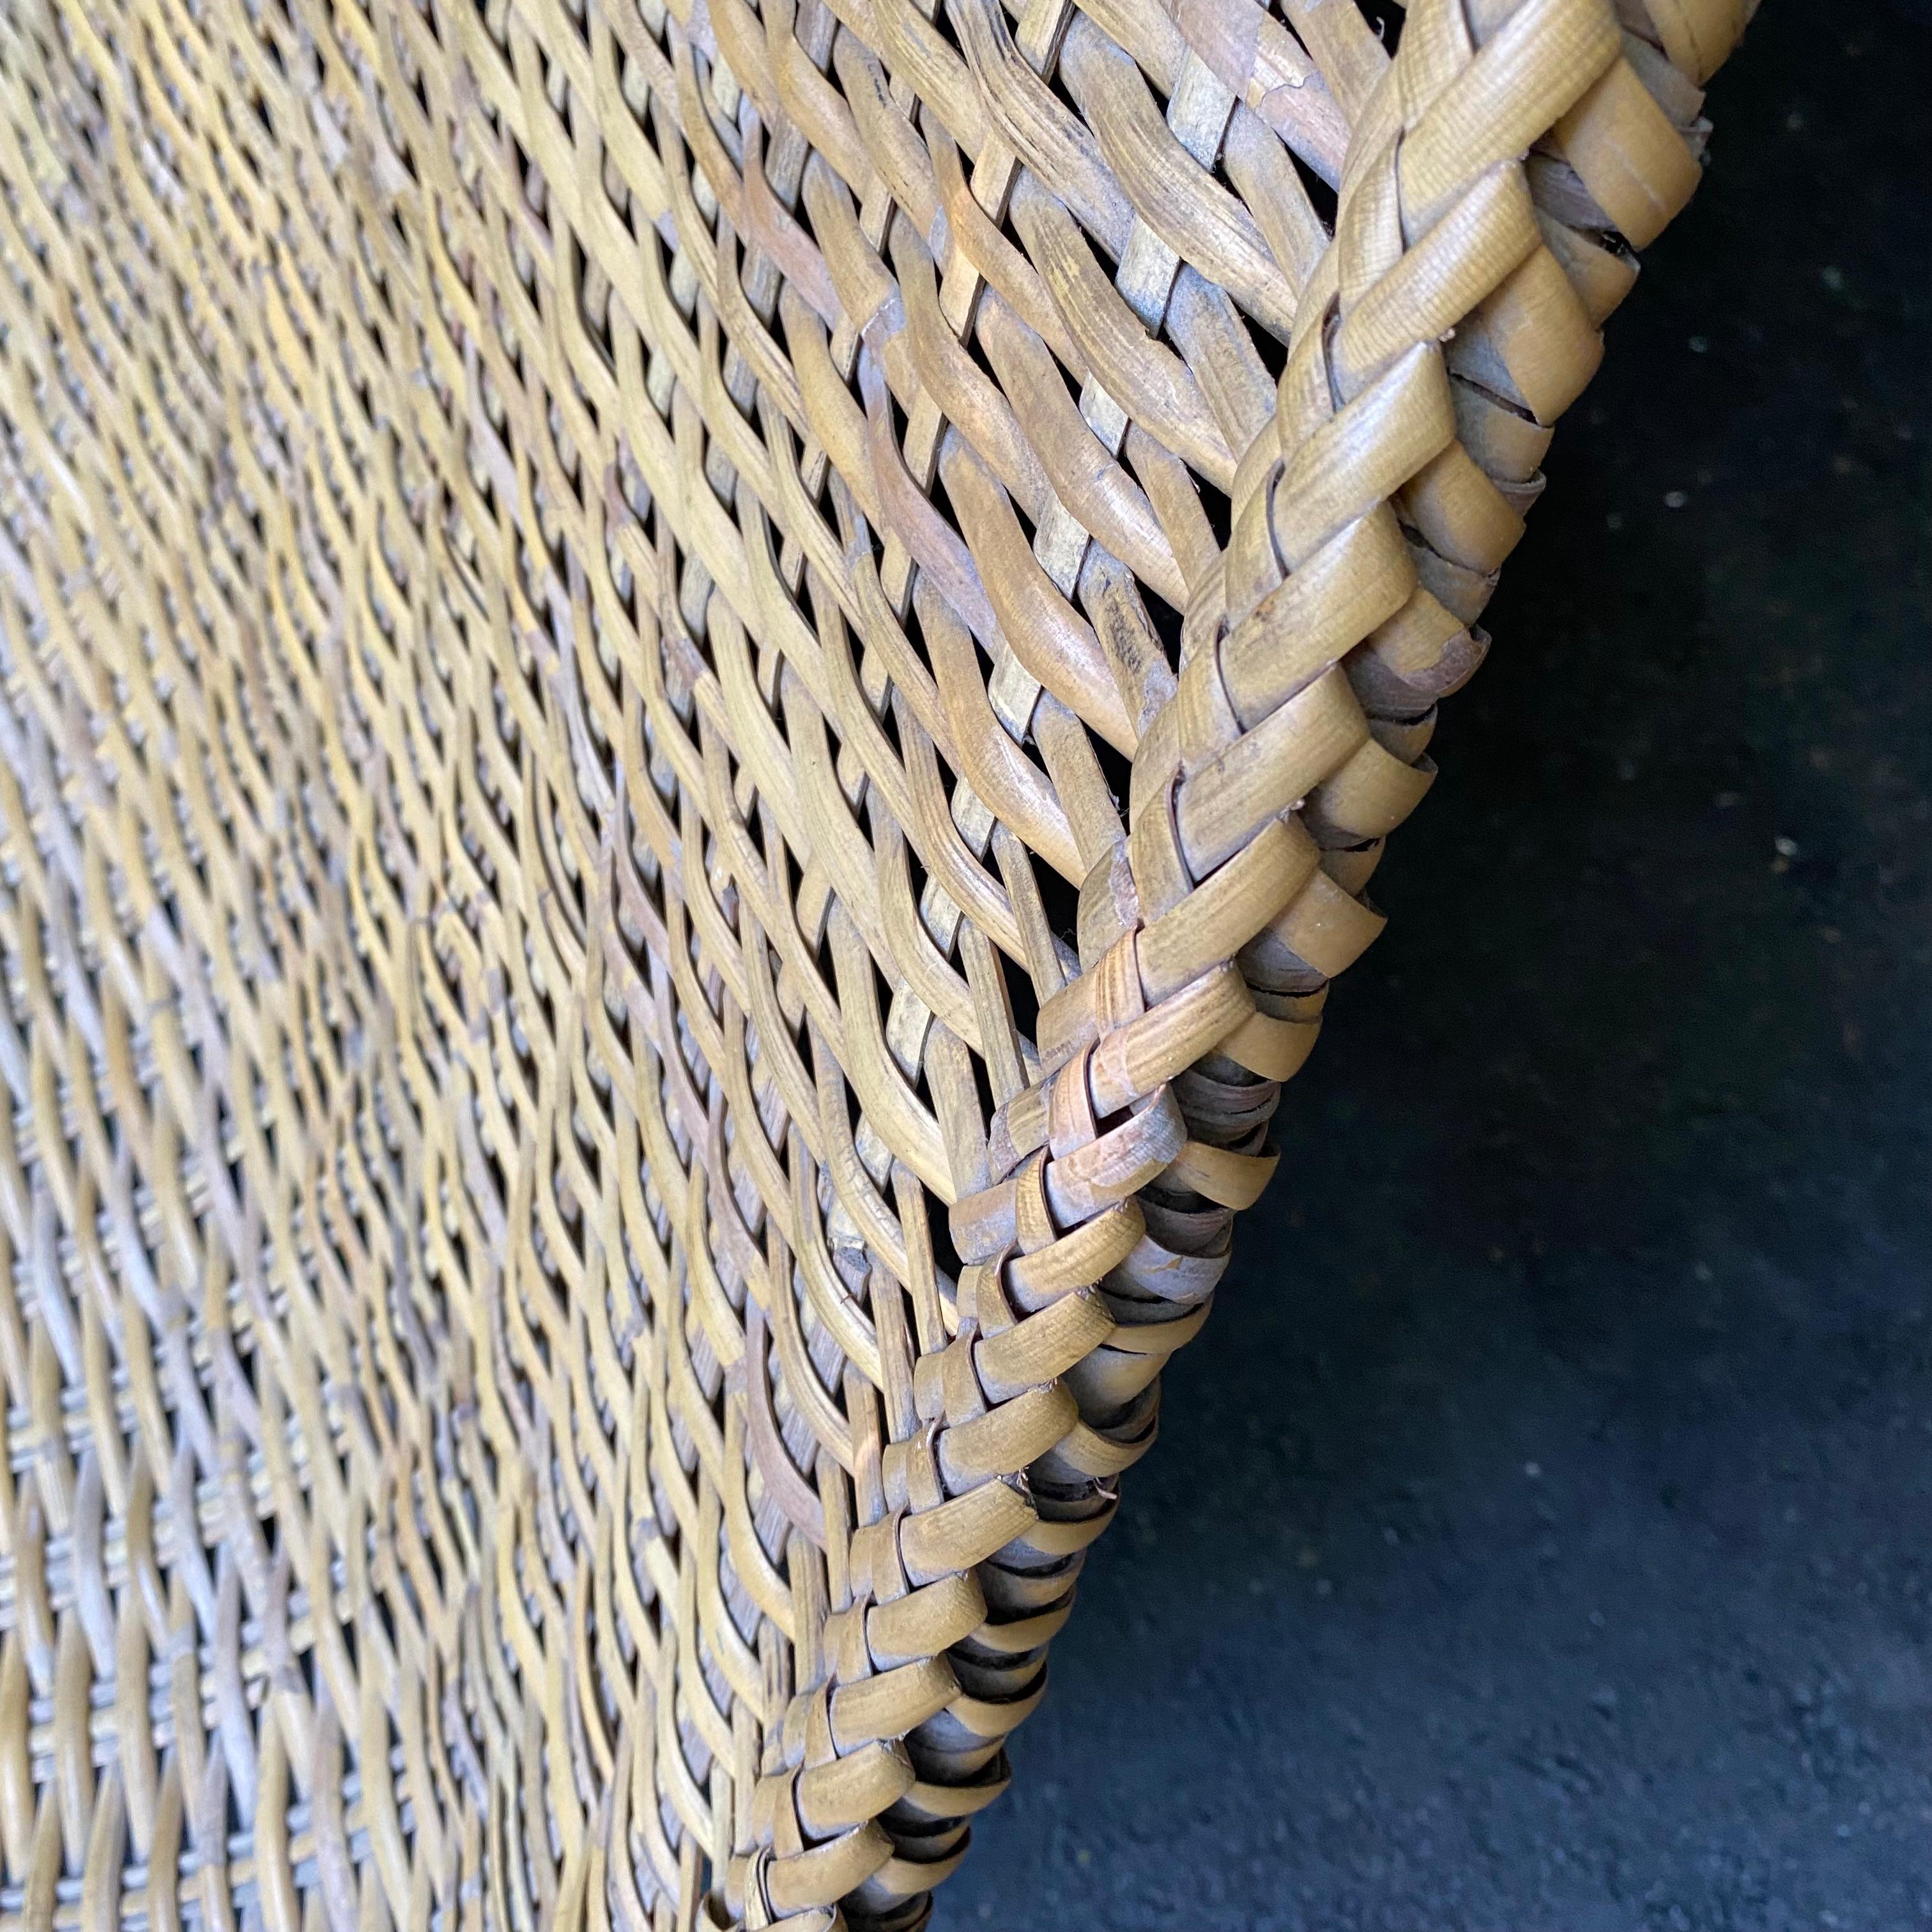 20th Century John Risley Hand-Woven Rattan Cane and Iron Duyan Lounge Chair for Ficks Reed